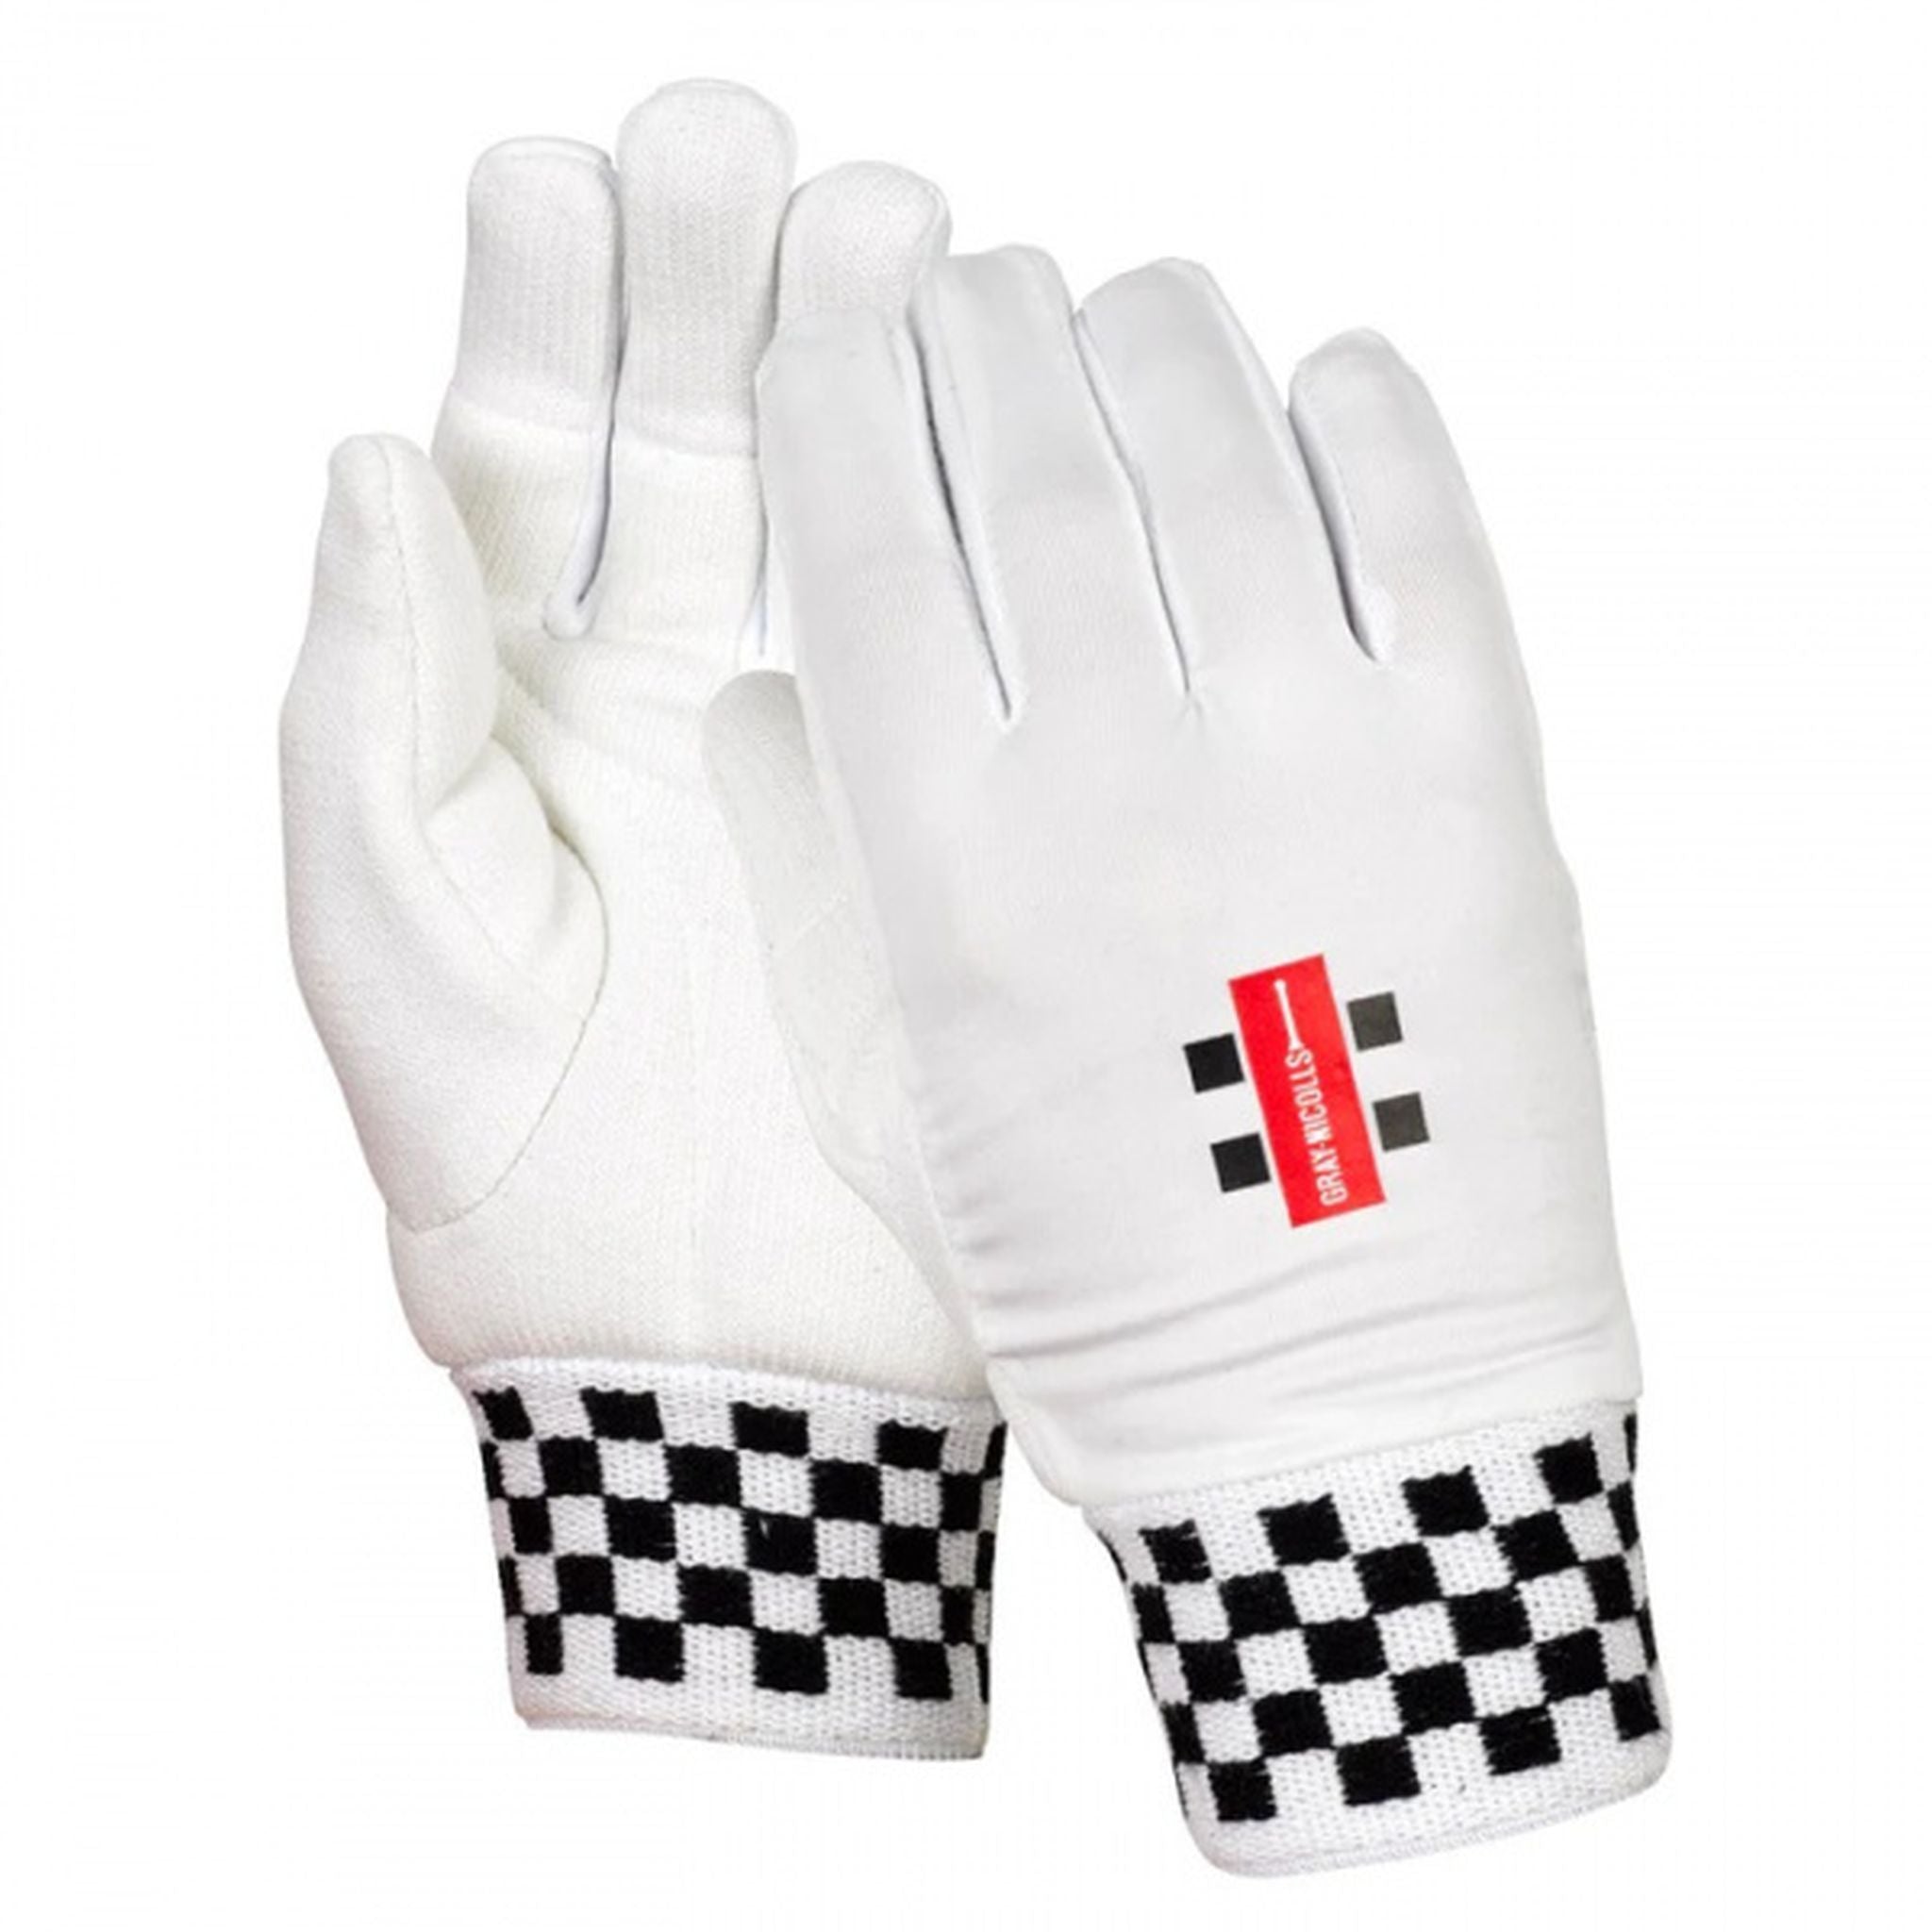 Gray-Nicolls Elite Cotton Padded Adult Wicket Keeping Inners